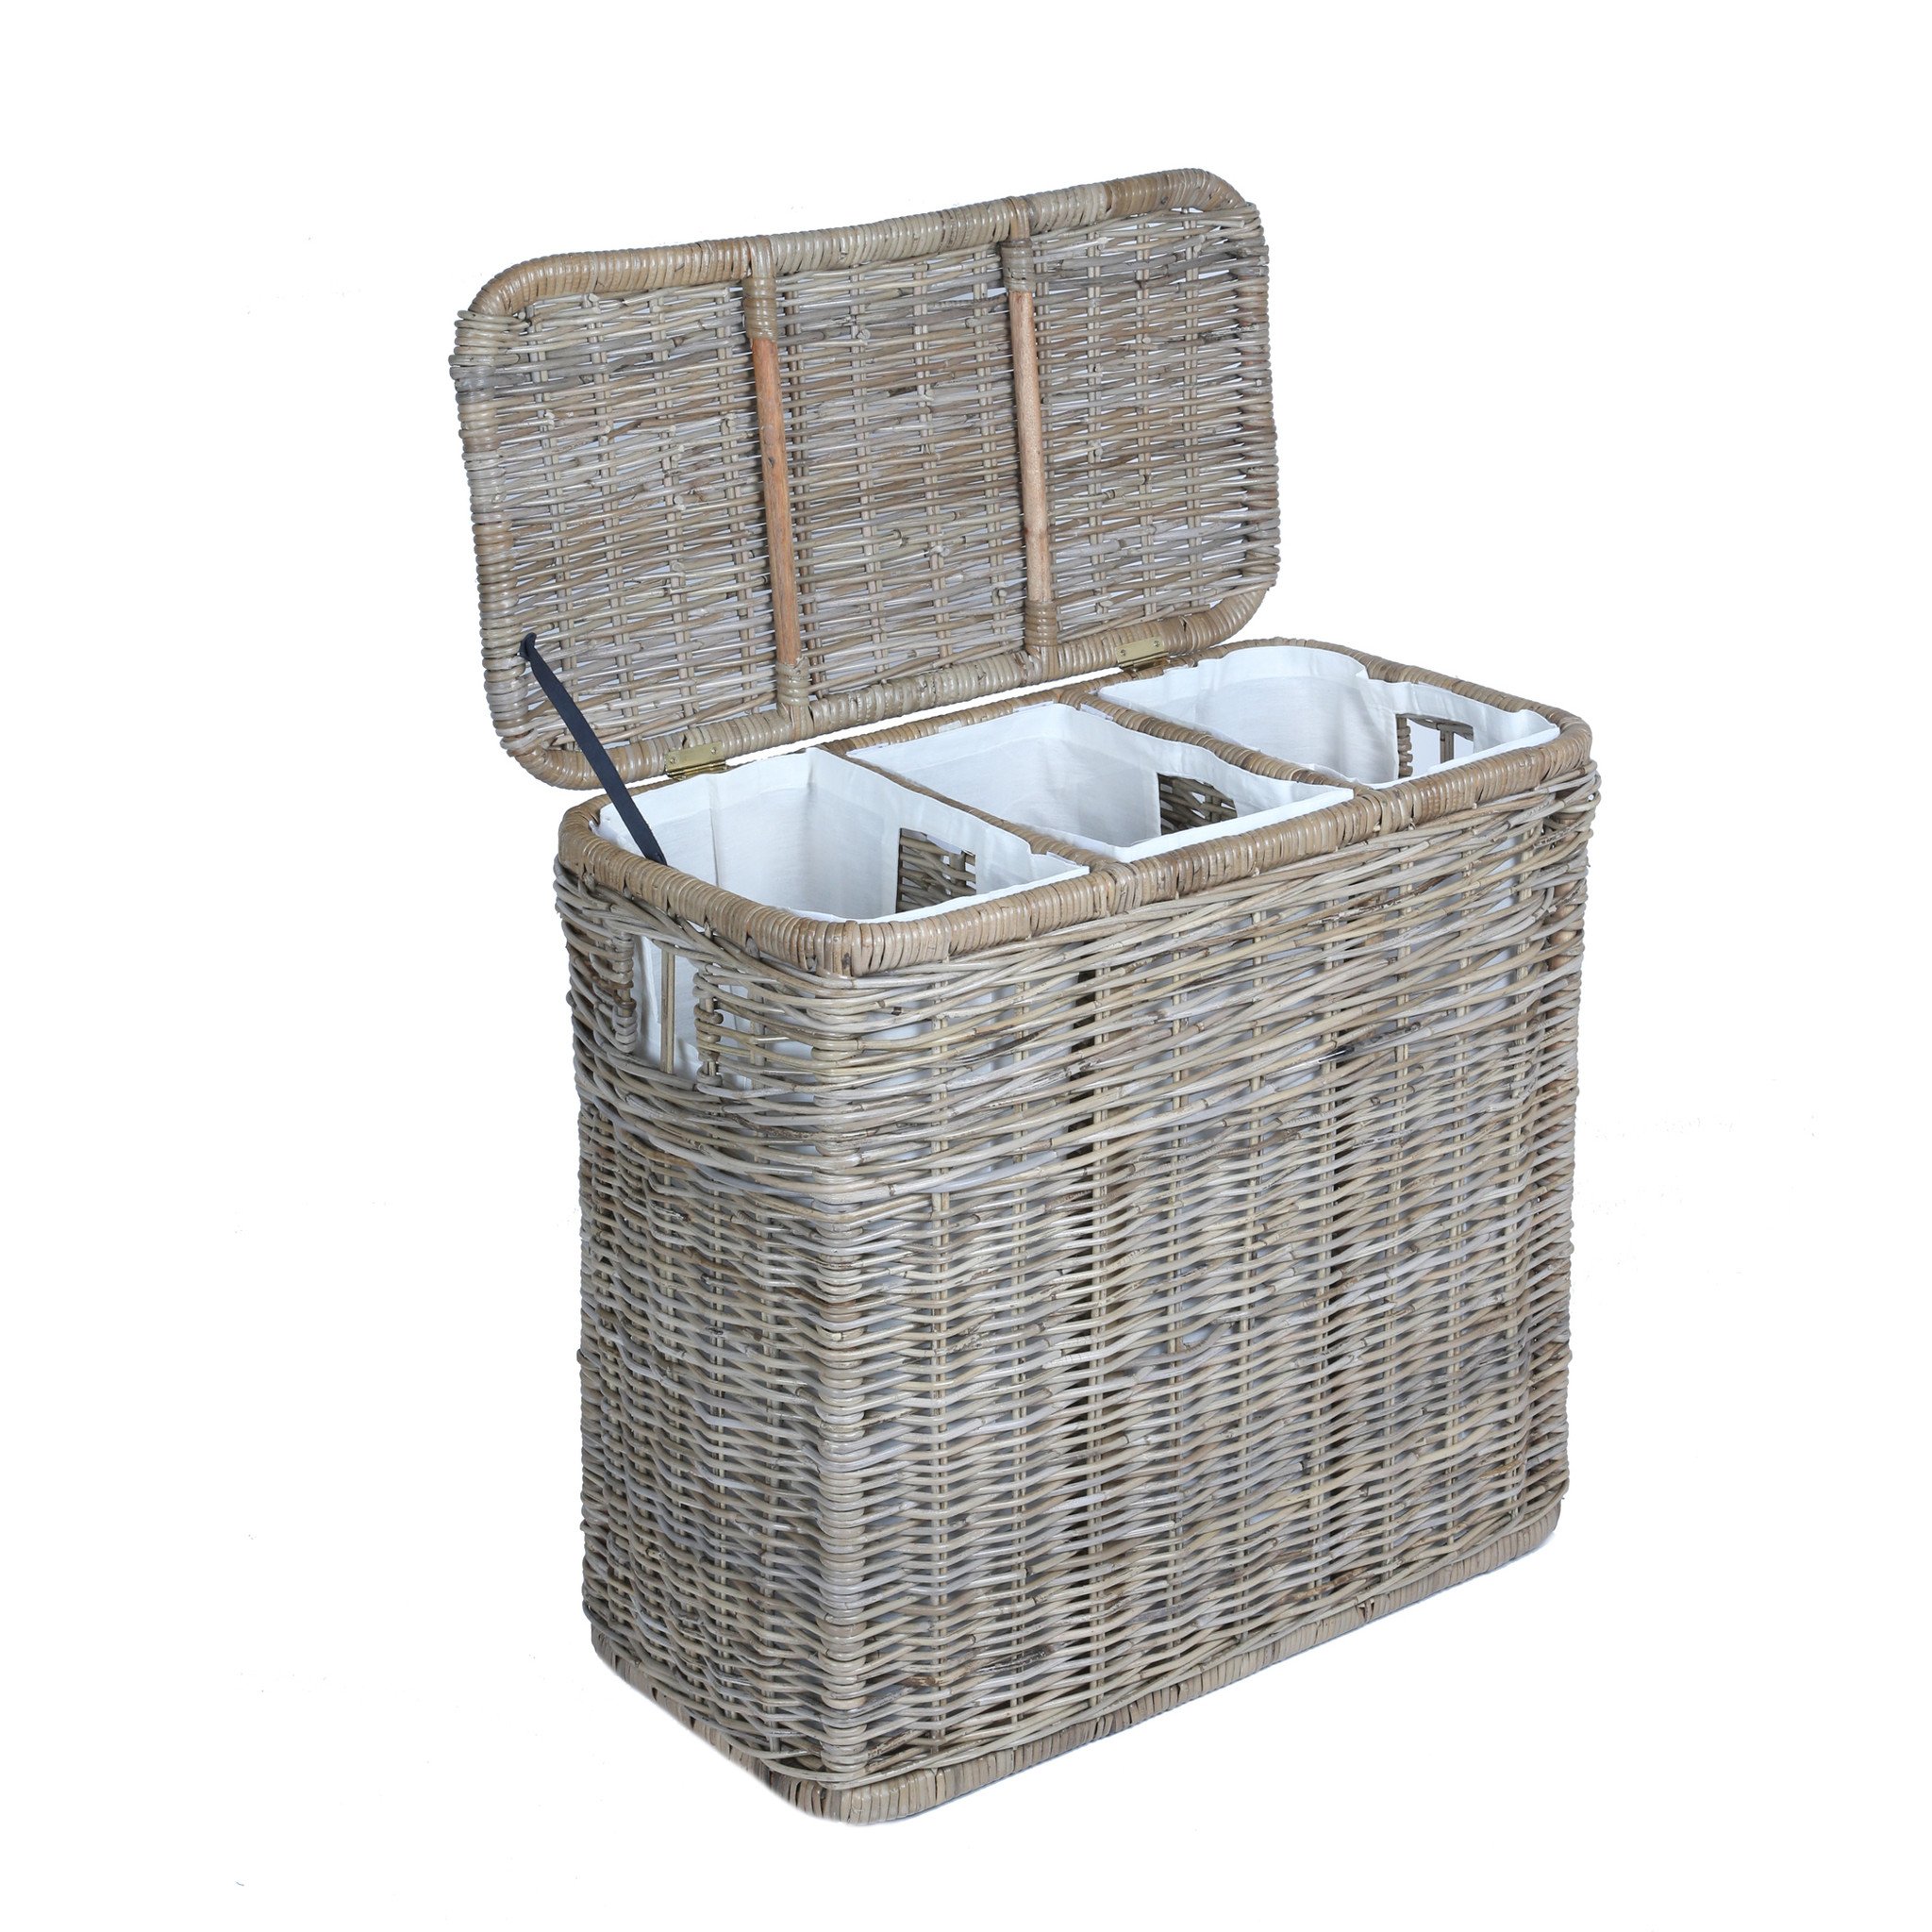 Kubu Wicker laundry basket with 3 compartments in cheerful gray with open lid |  BNLKHAW